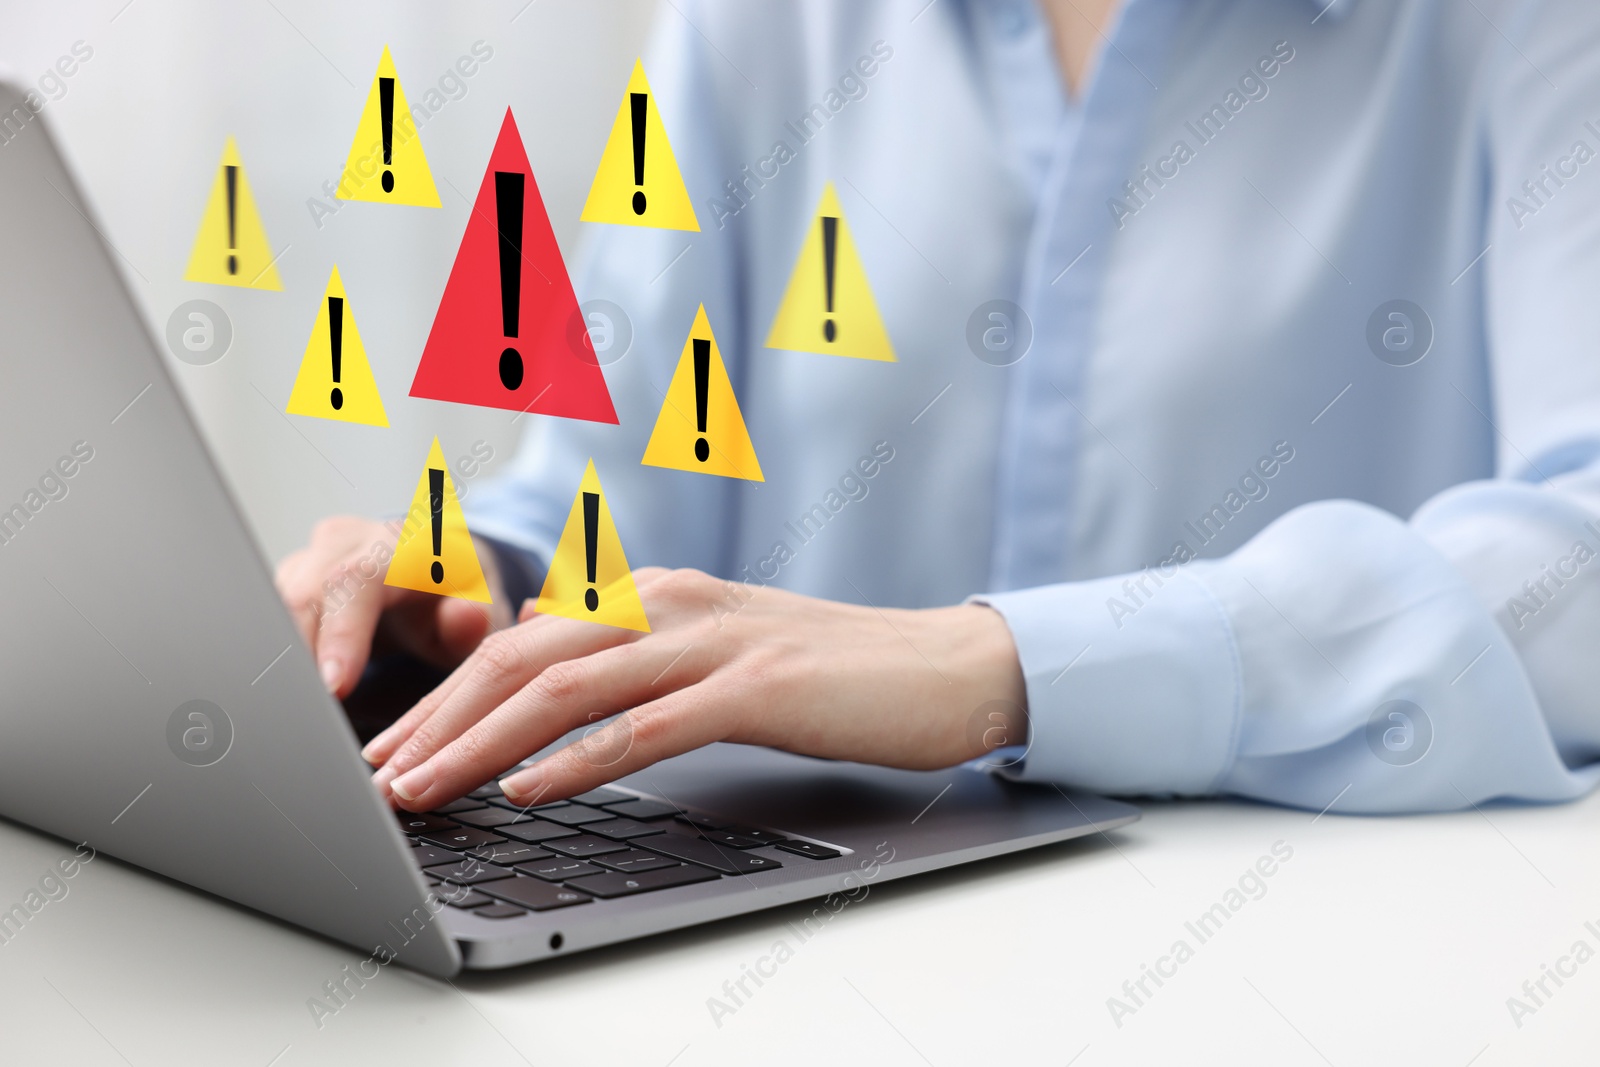 Image of Woman using laptop at table, closeup. Warning signs for spam messages above device